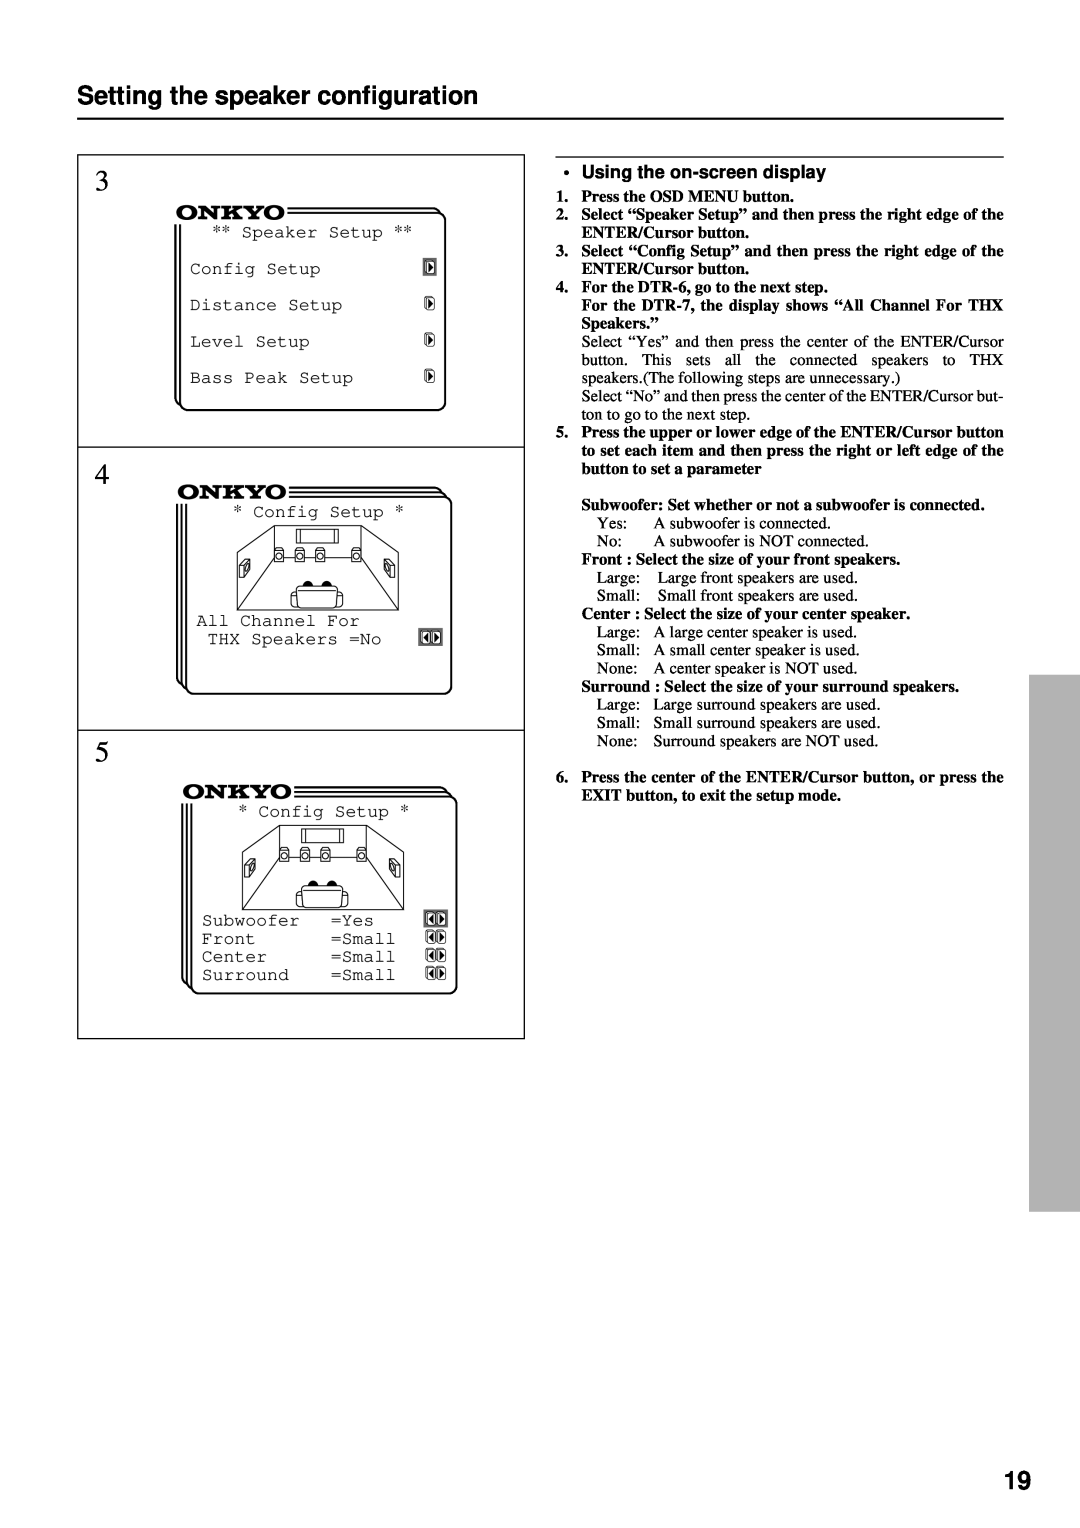 Integra DTR-7 instruction manual Setting the speaker configuration, Using the on-screendisplay 